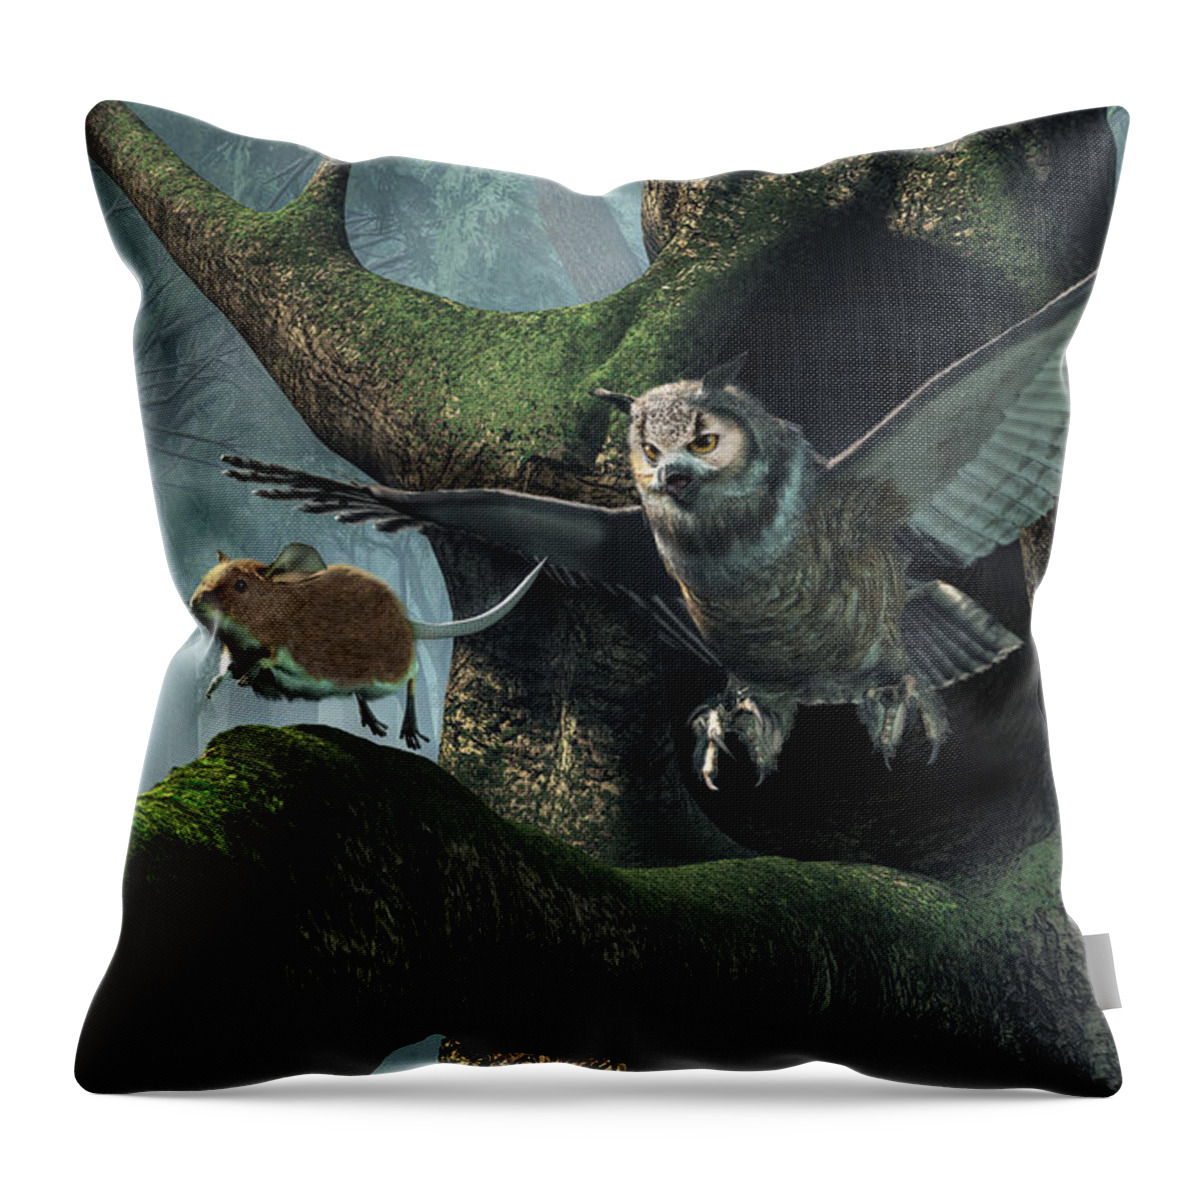 Owl Throw Pillow featuring the digital art The Mouse and the The Owl by Daniel Eskridge